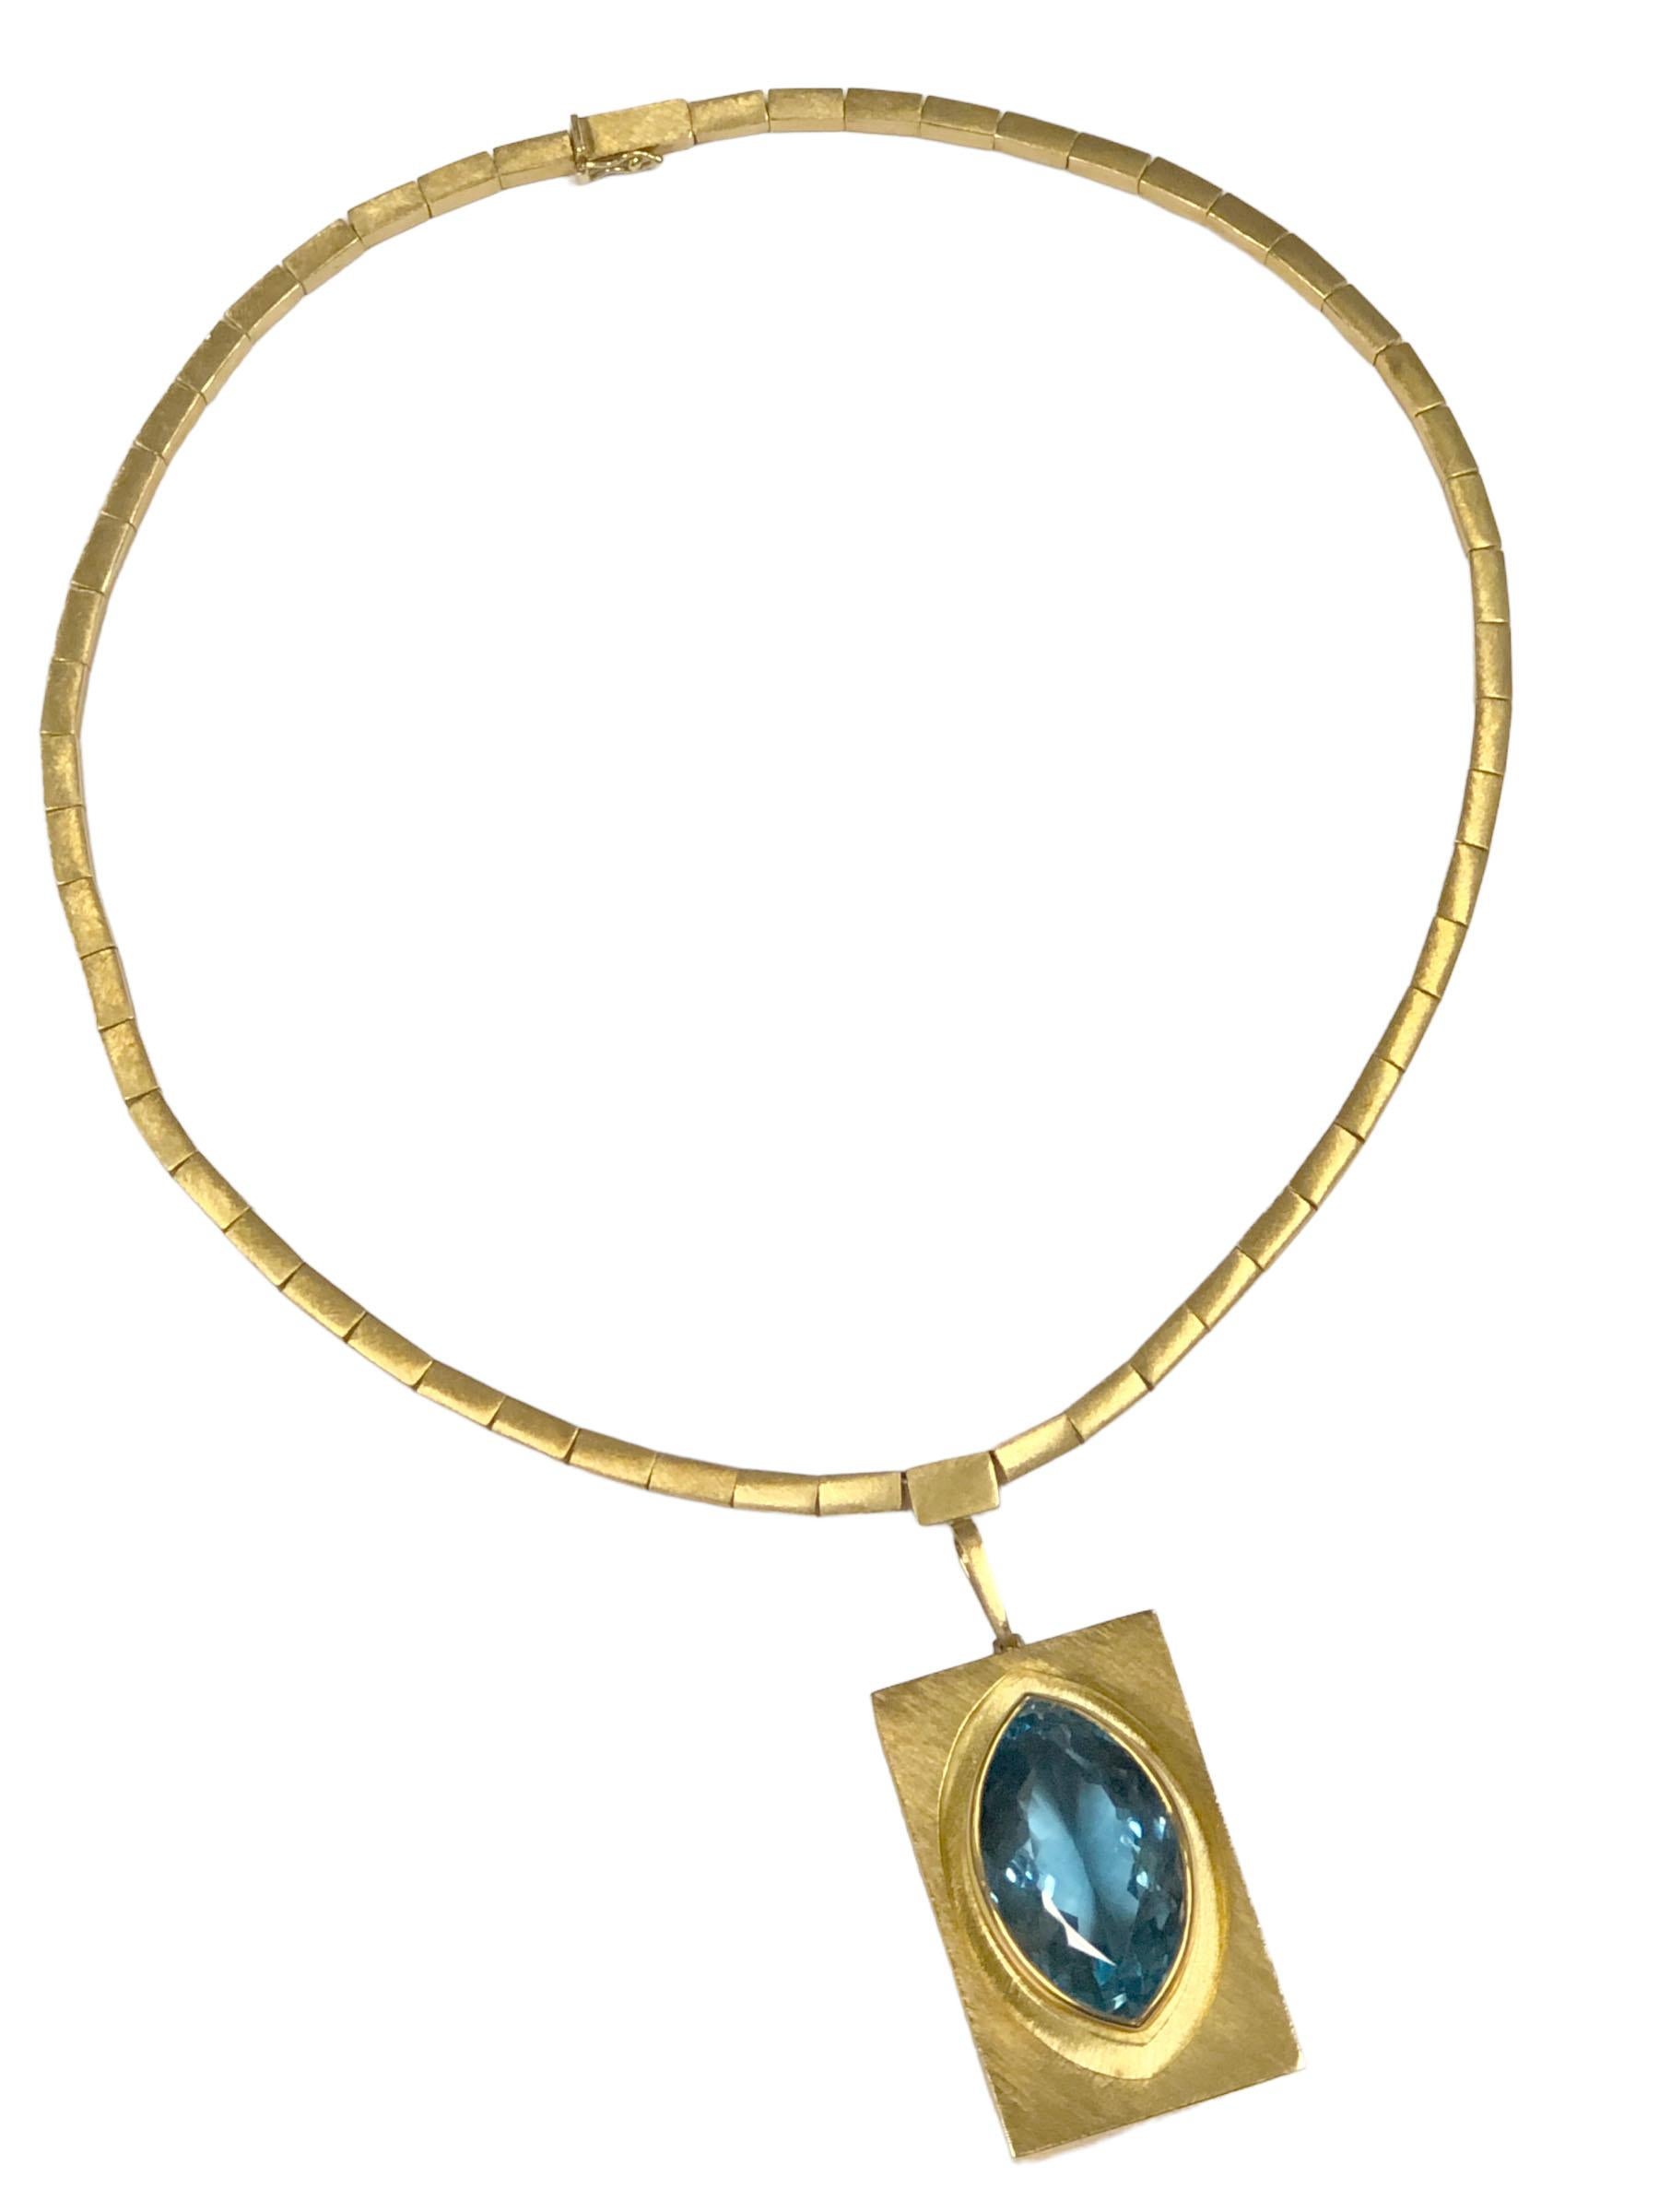 H. Burle Marx Large Mid Century Gold and Topaz Necklace Original Receipts For Sale 1